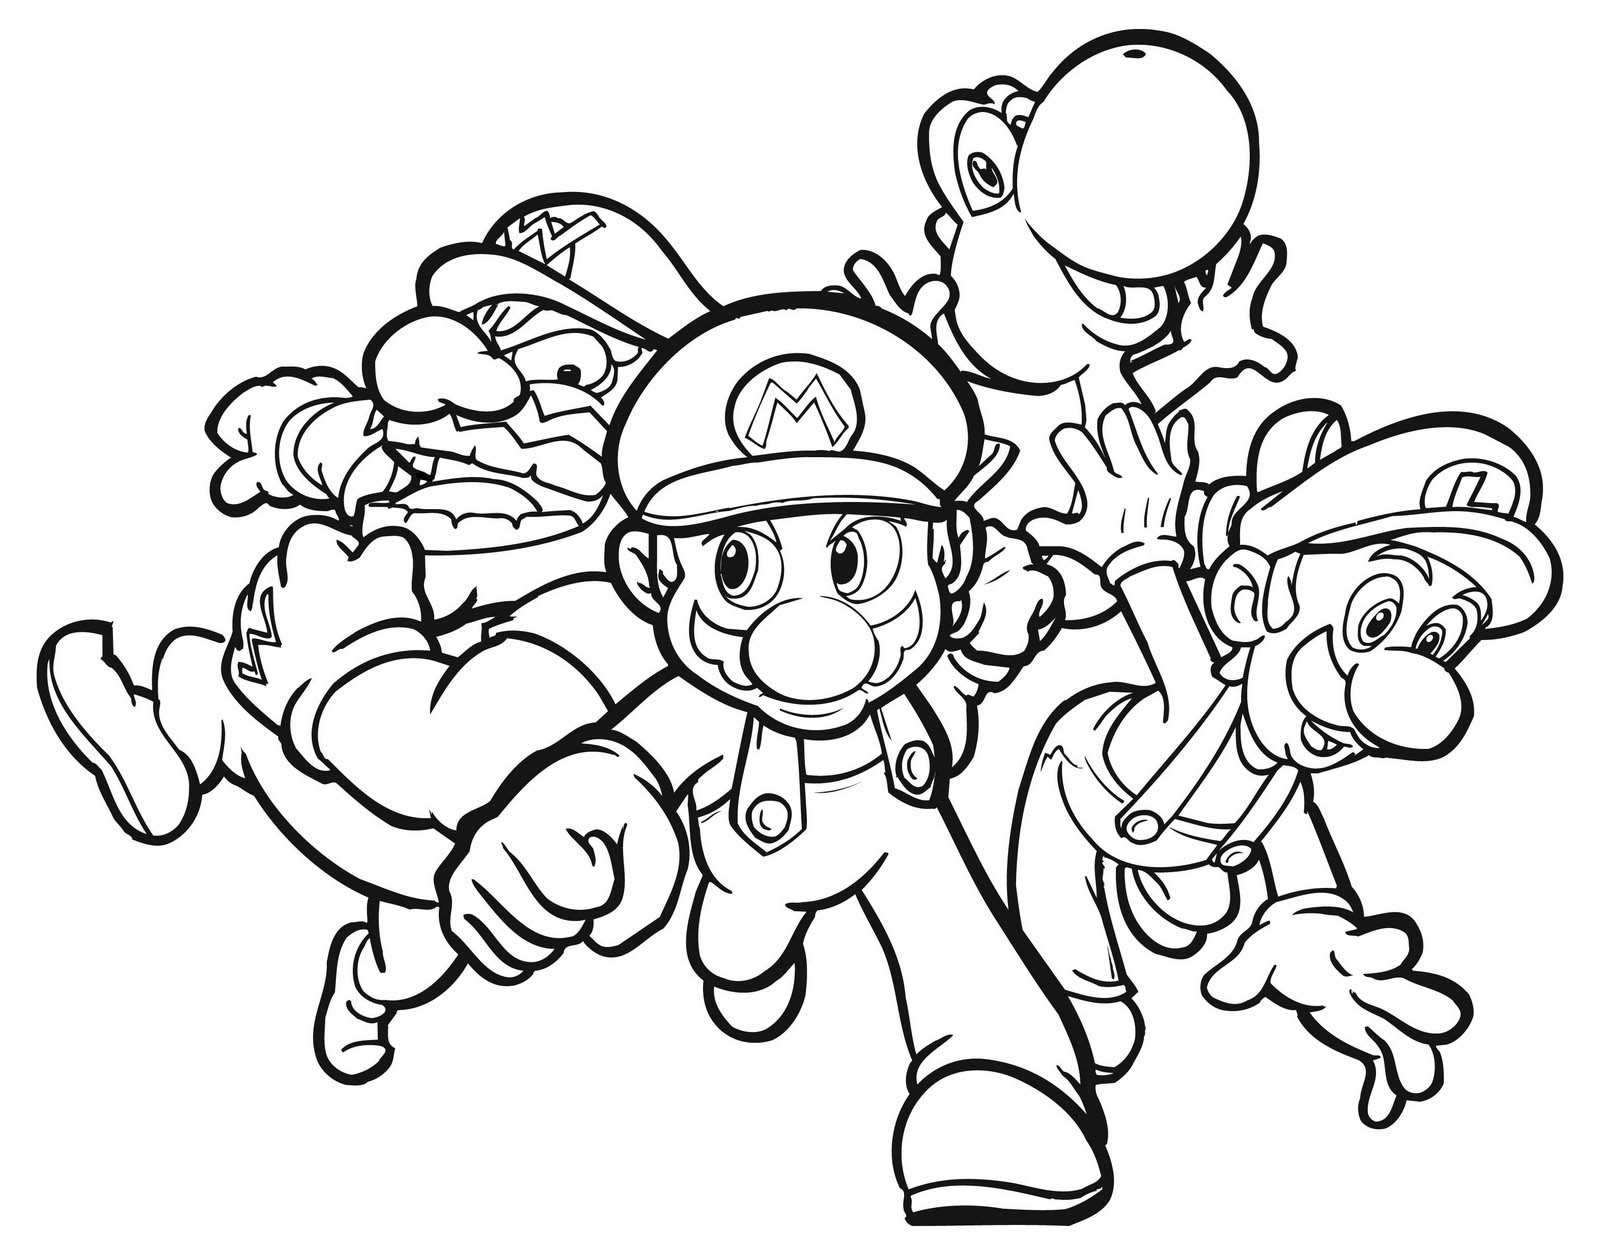 Mario Pictures To Color 3